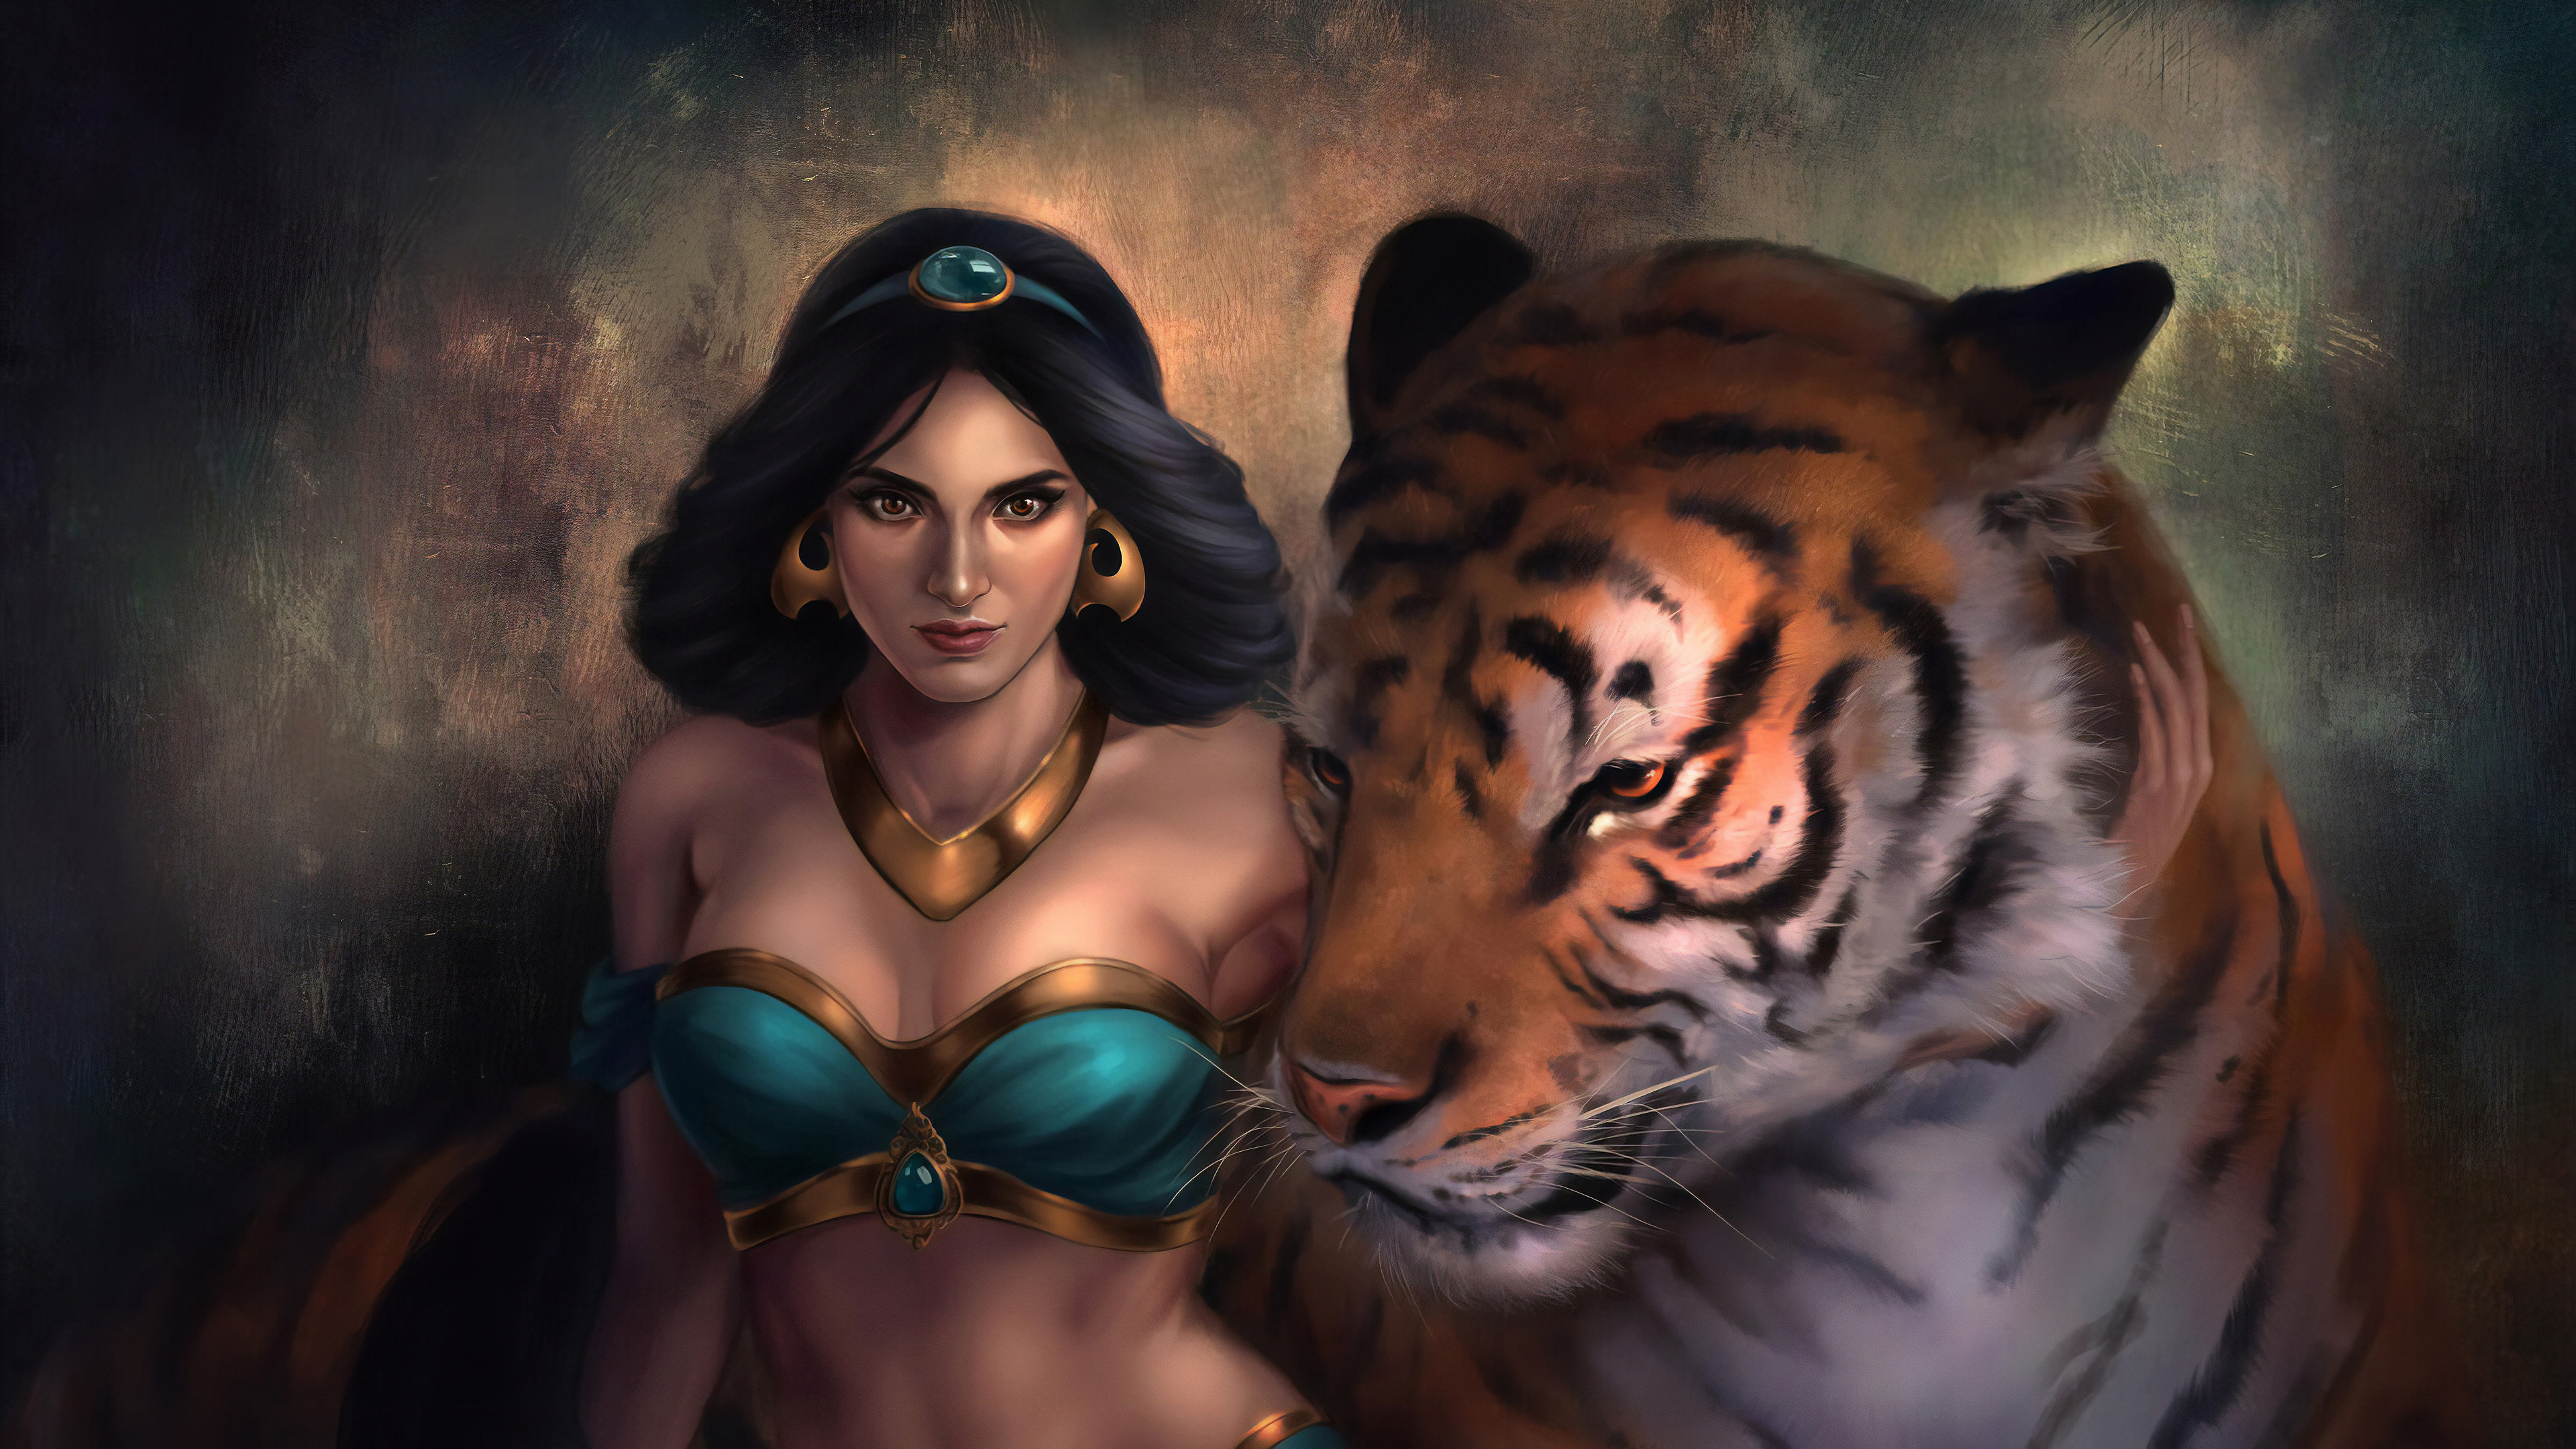 Wallpaper Woman in Blue Brassiere Beside Tiger, Background - Download Free  Image